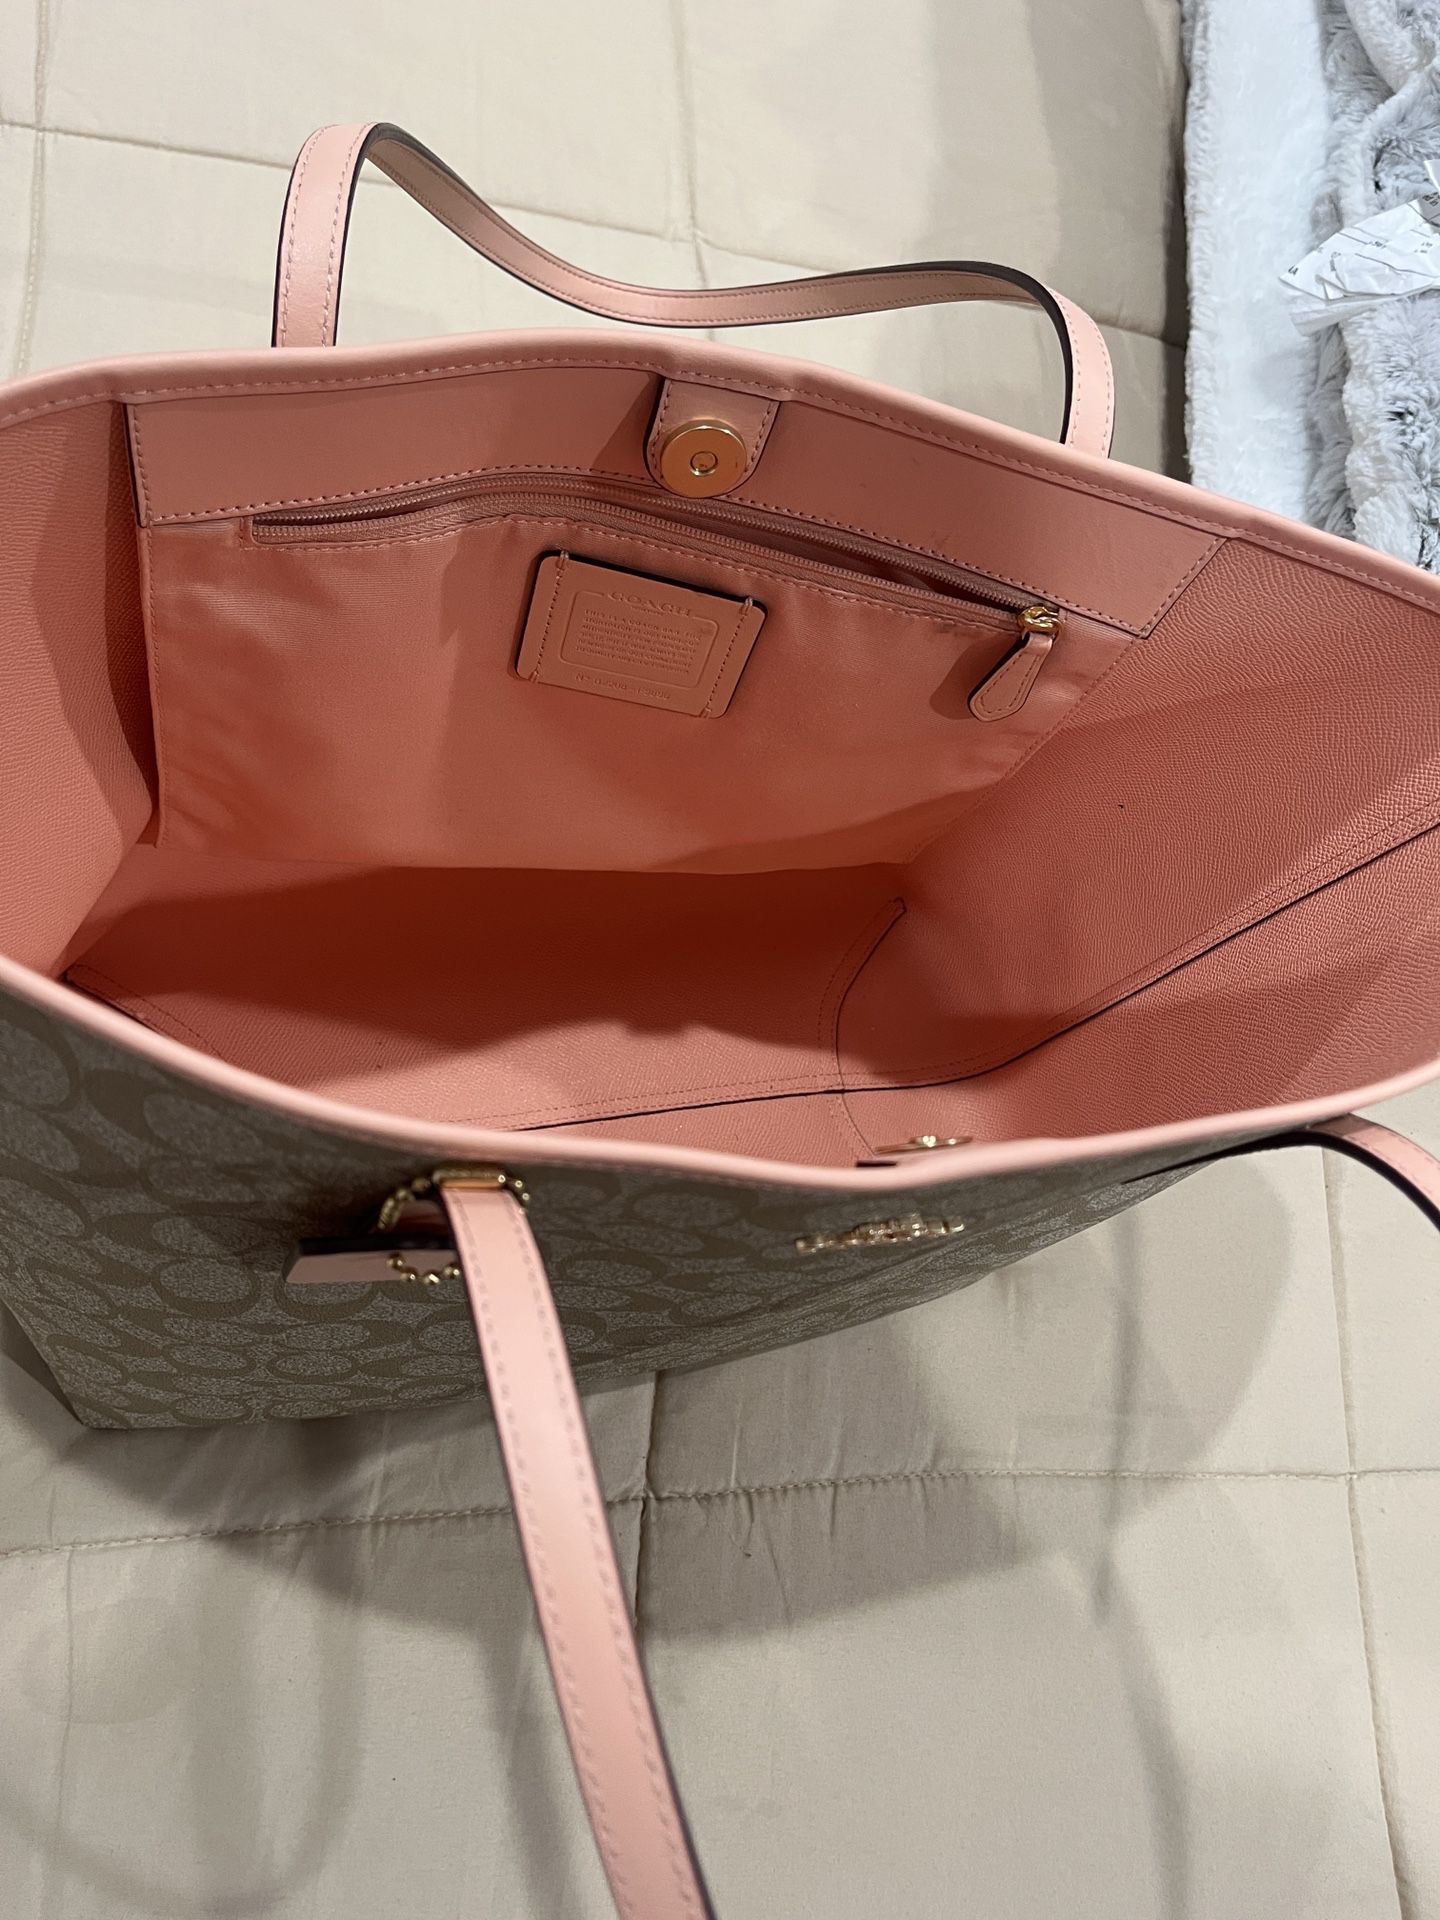 Authentic coach Large city tote for Sale in St. Cloud, FL - OfferUp